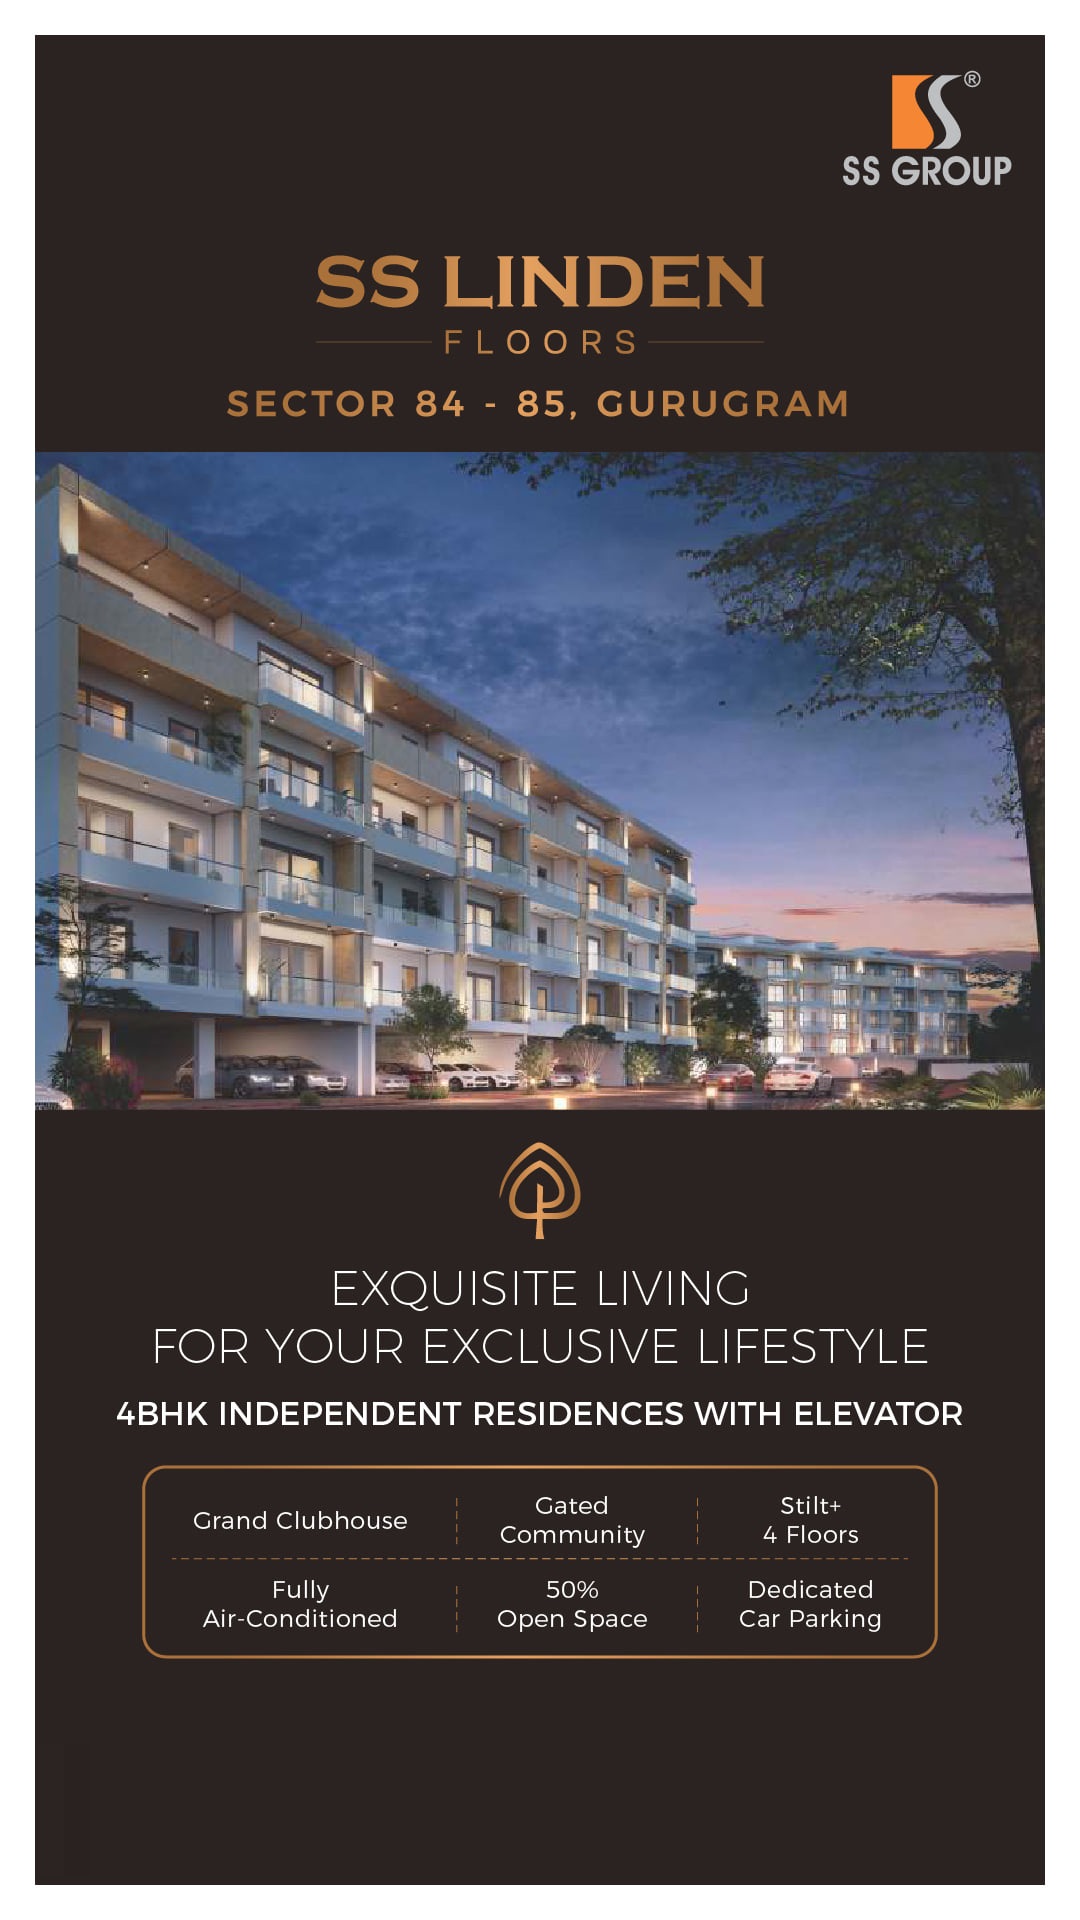 Exquisite living for your exclusive lifestyle at SS Linden Floors, Sector 84, Gurgaon Update